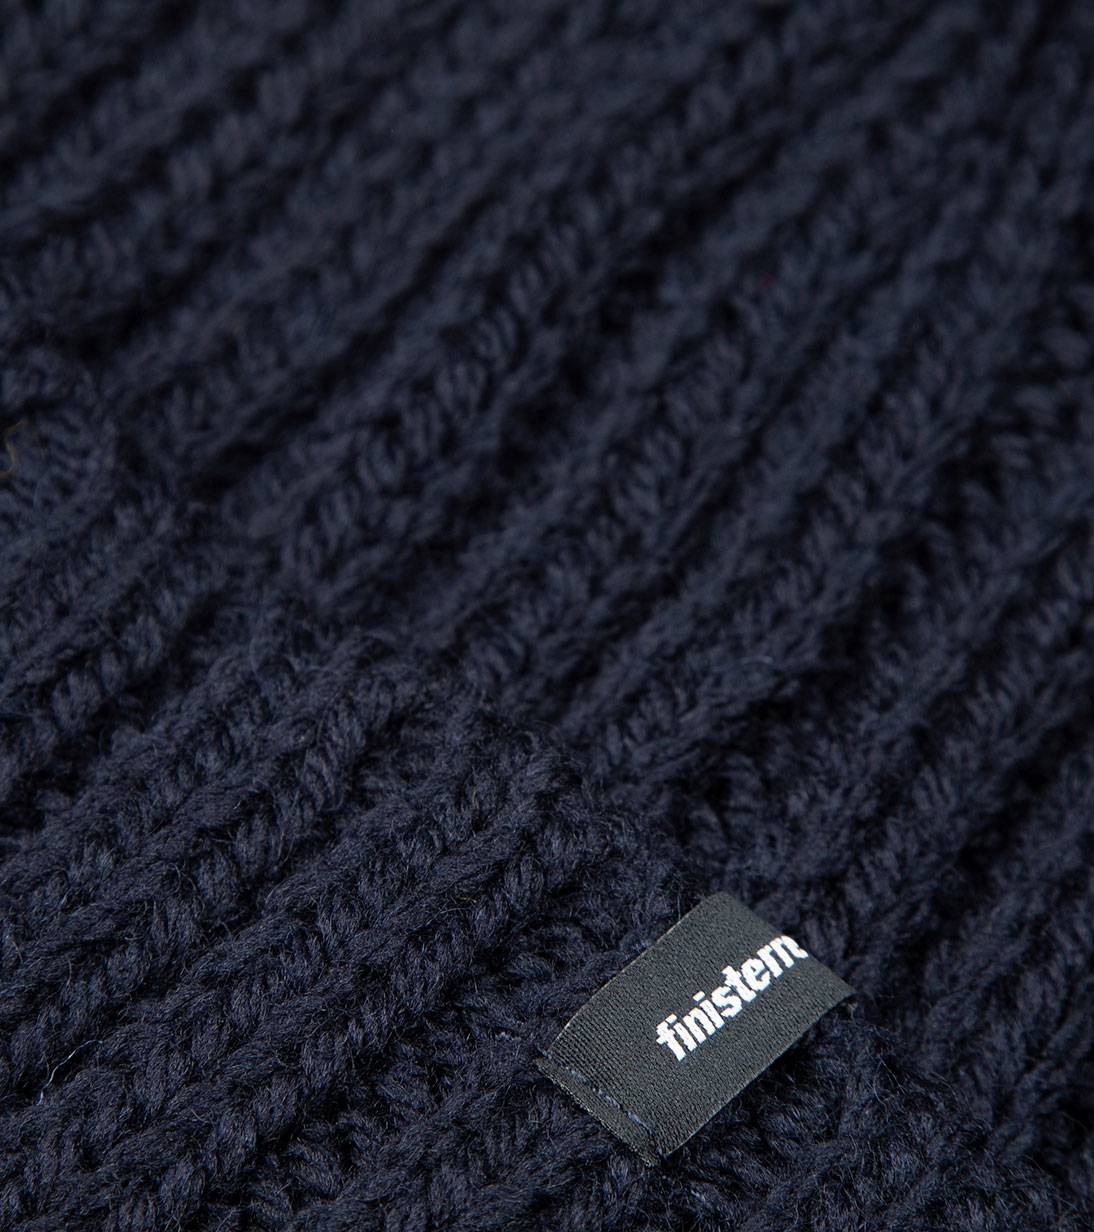 Made from: 50% Merino Wool / 50% Recycled Polyester